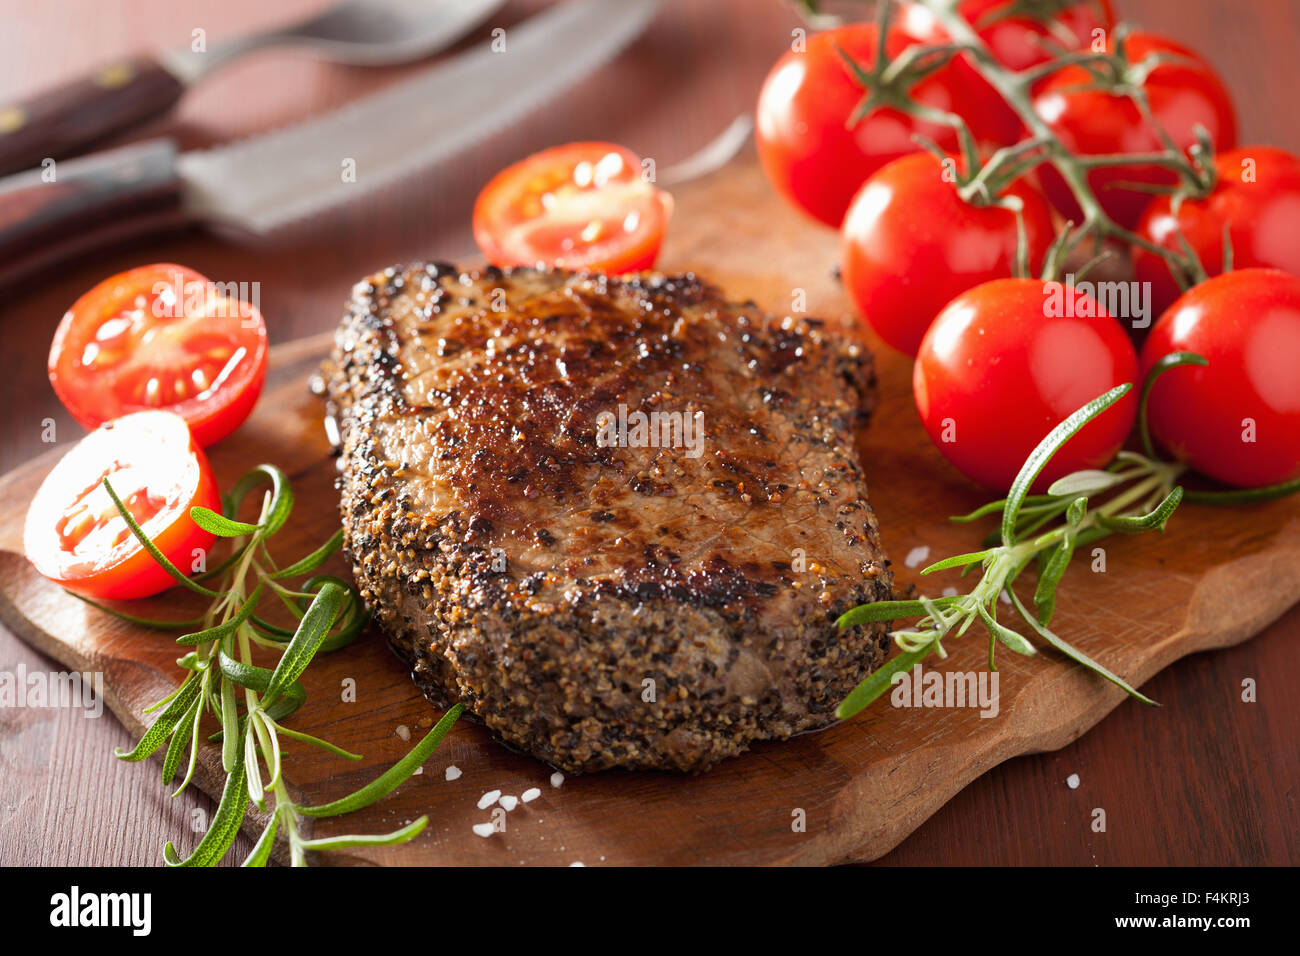 beef steak with spices and rosemary on wooden background Stock Photo